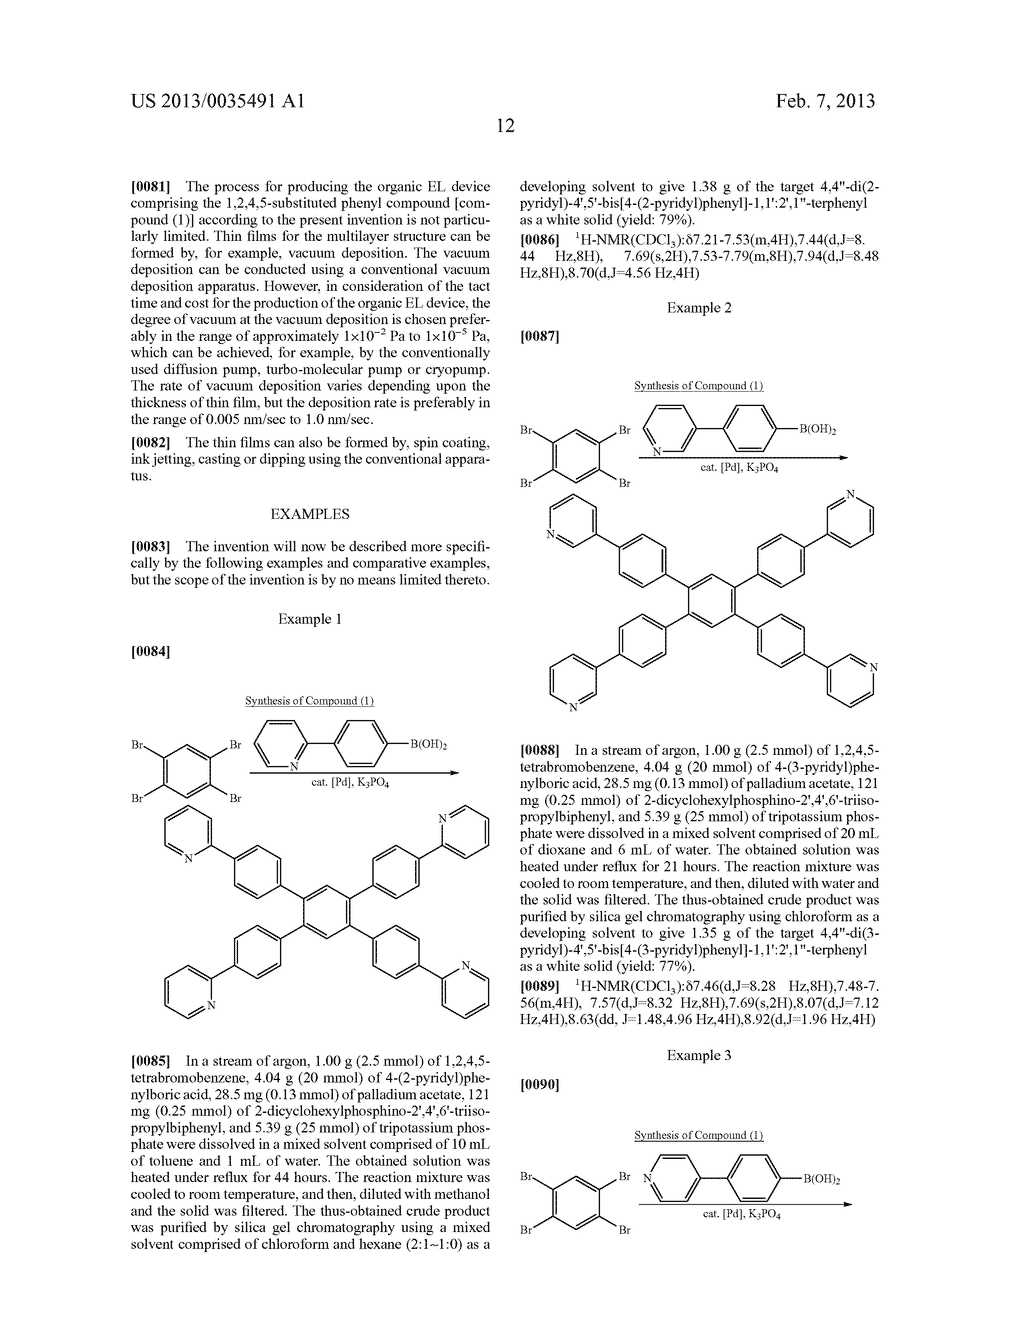 1,2,4, 5-SUBSTITUTED PHENYL COMPOUND, METHOD FOR PRODUCING SAME AND     ORGANIC ELECTROLUMINESCENT DEVICE COMPRISING SAME AS CONSTITUENT - diagram, schematic, and image 14